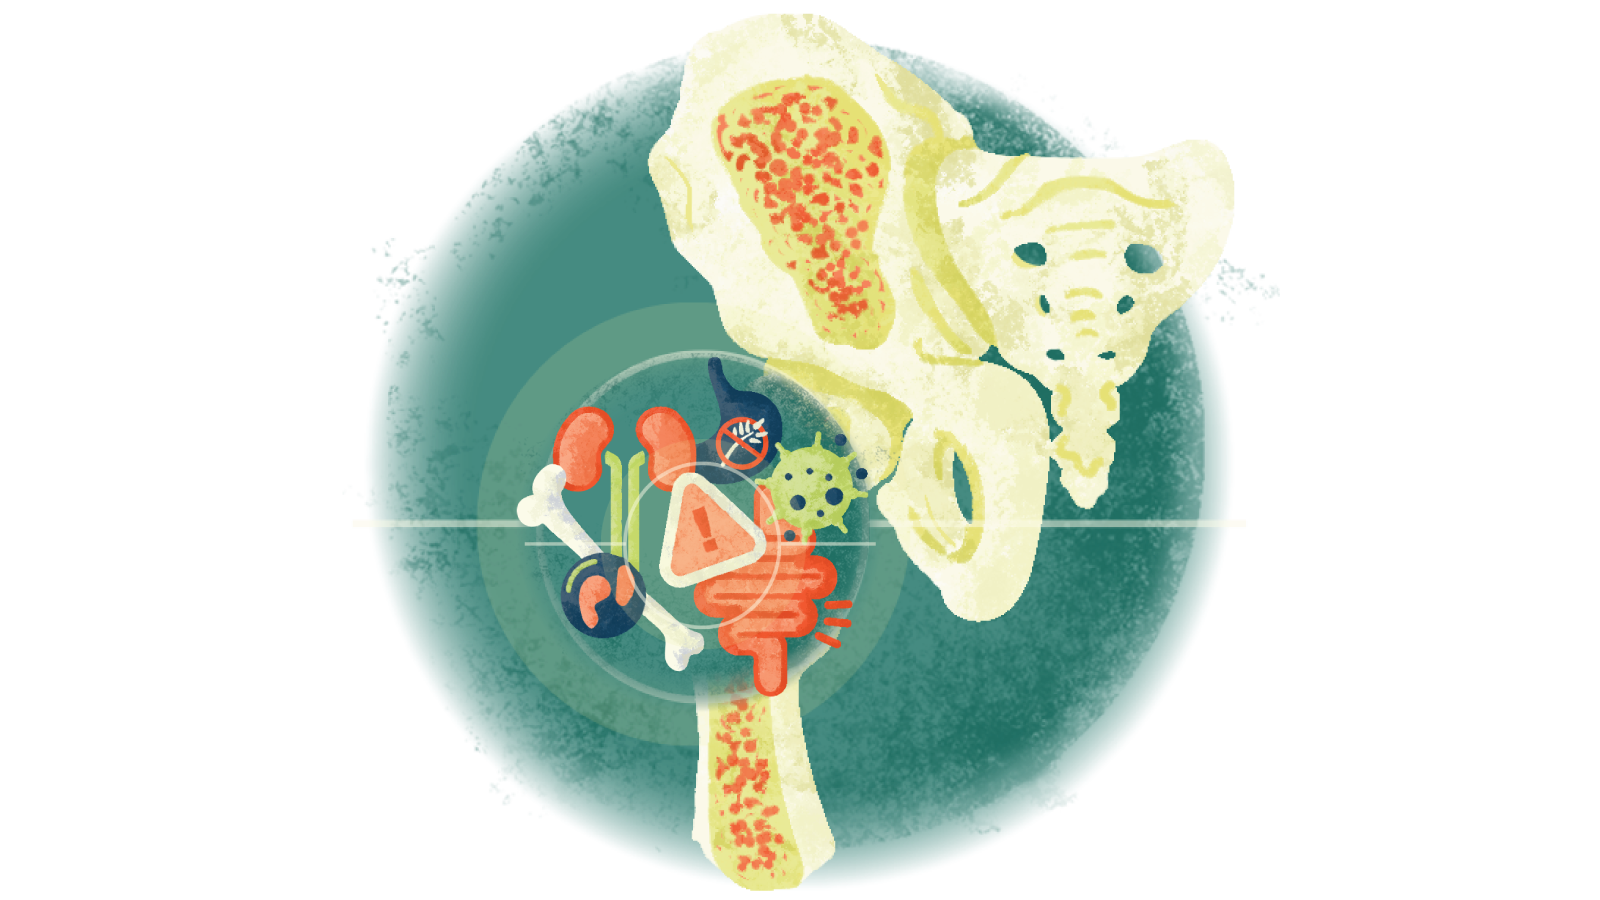 Illustration of different images of medical conditions that can cause osteoporosis over a bone with osteoporosis